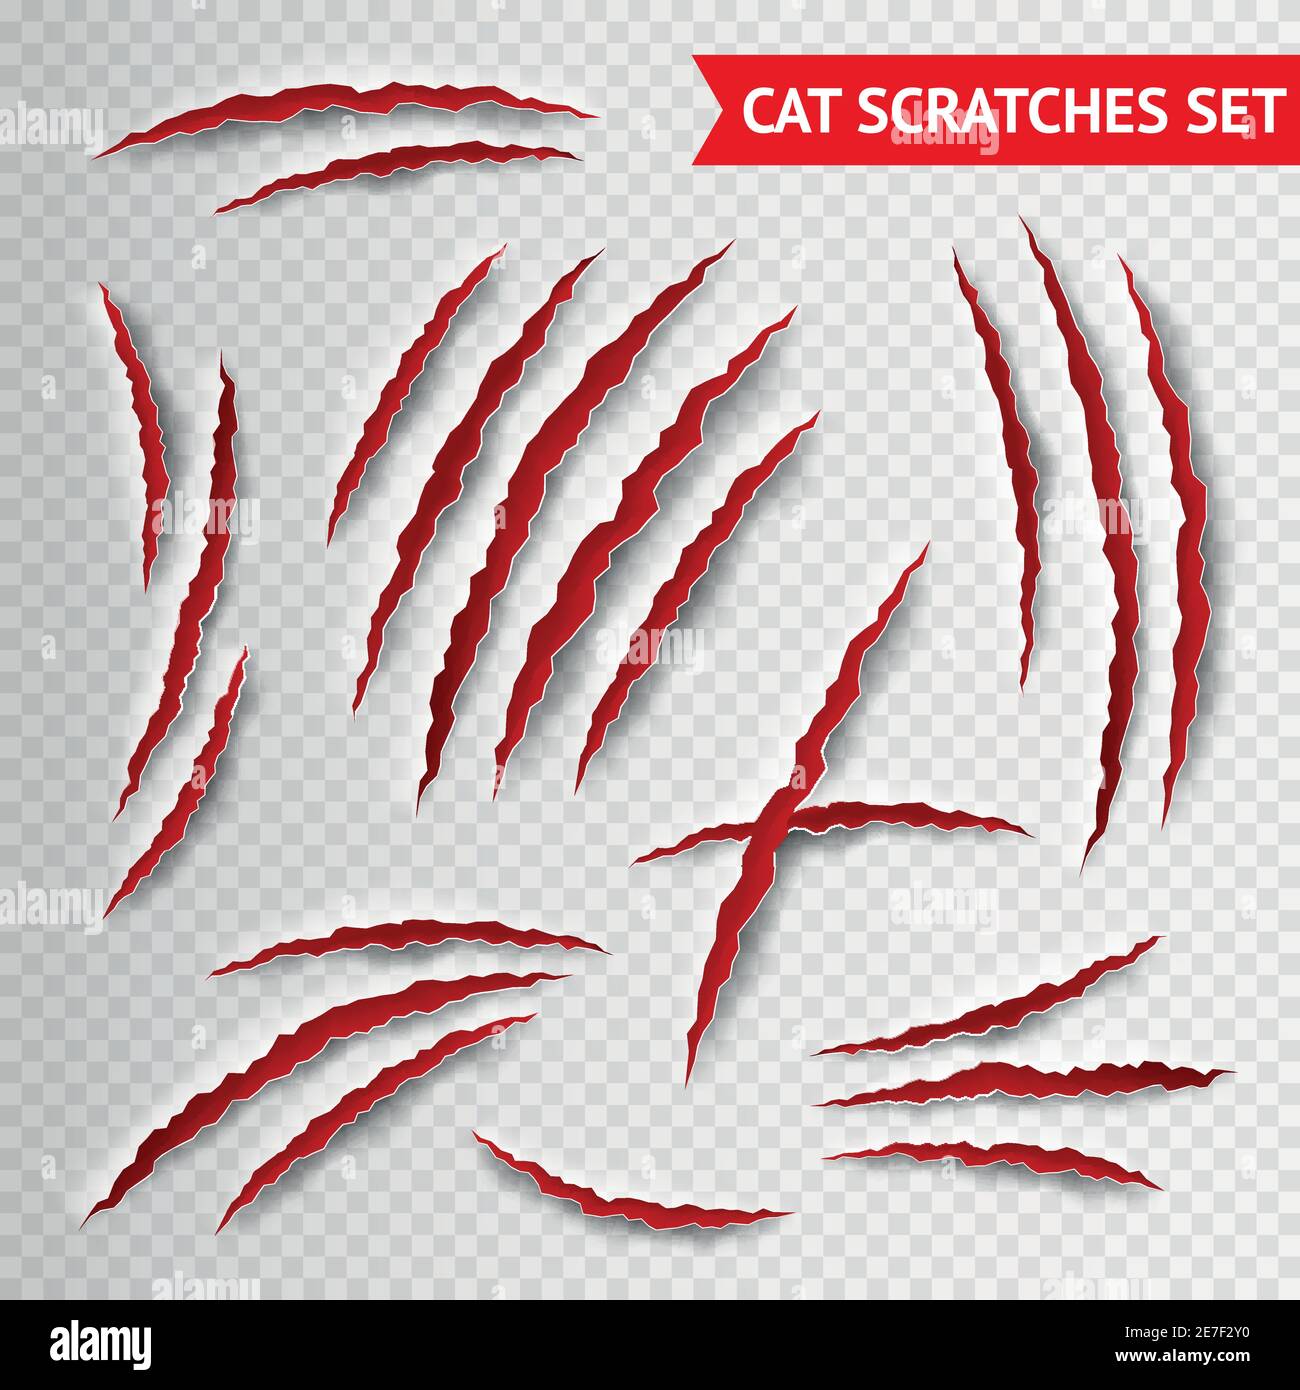 Cat claws scratches on transparent background realistic vector illustration Stock Vector